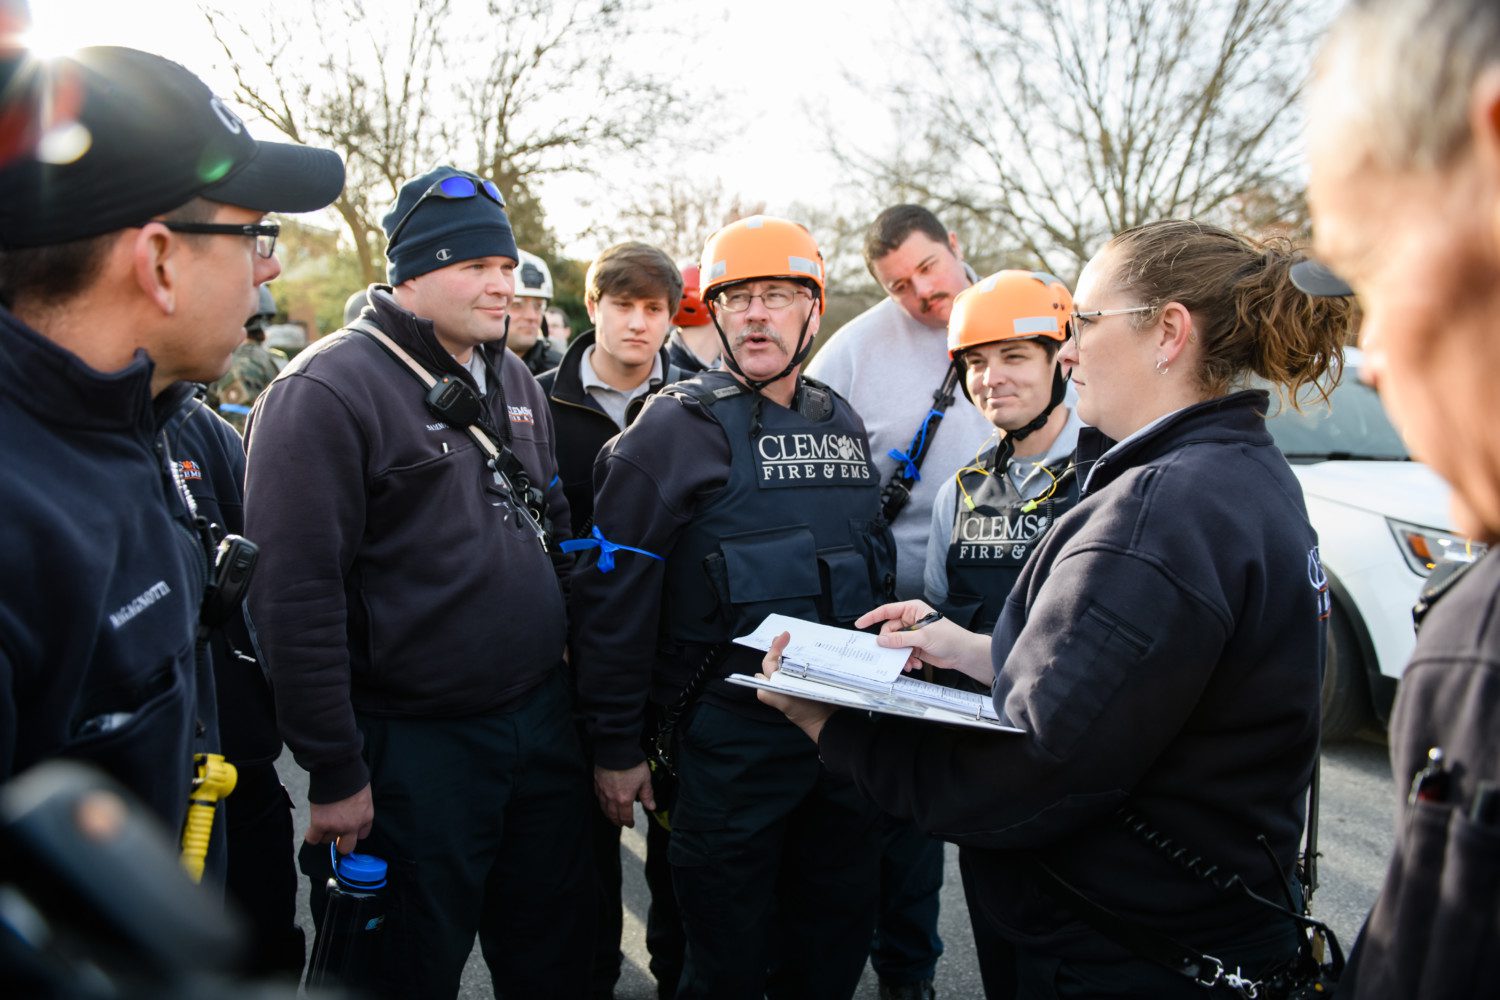 Jessica Landreth of Clemson University Fire Department provides instructions to a team on March 19 as part of an active shooter exercise on campus.